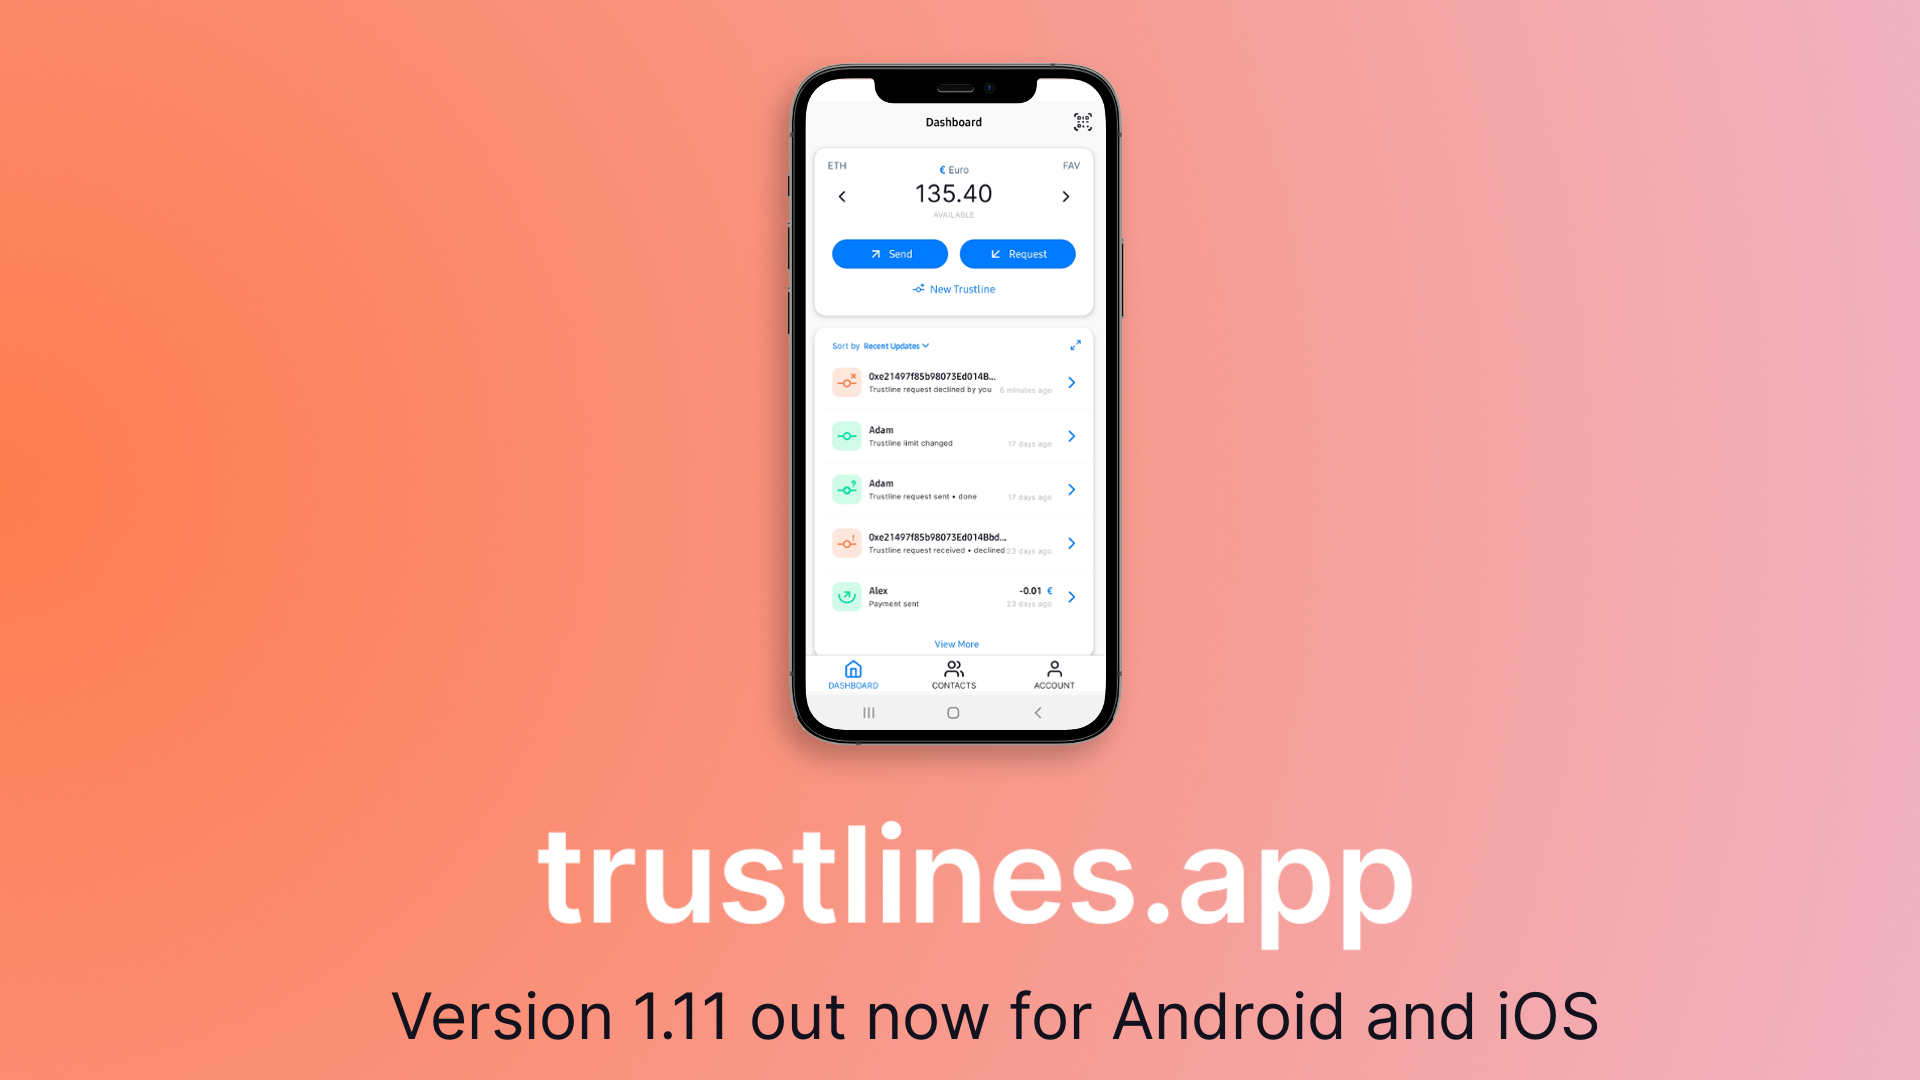 The Trustlines App Is Out Now!